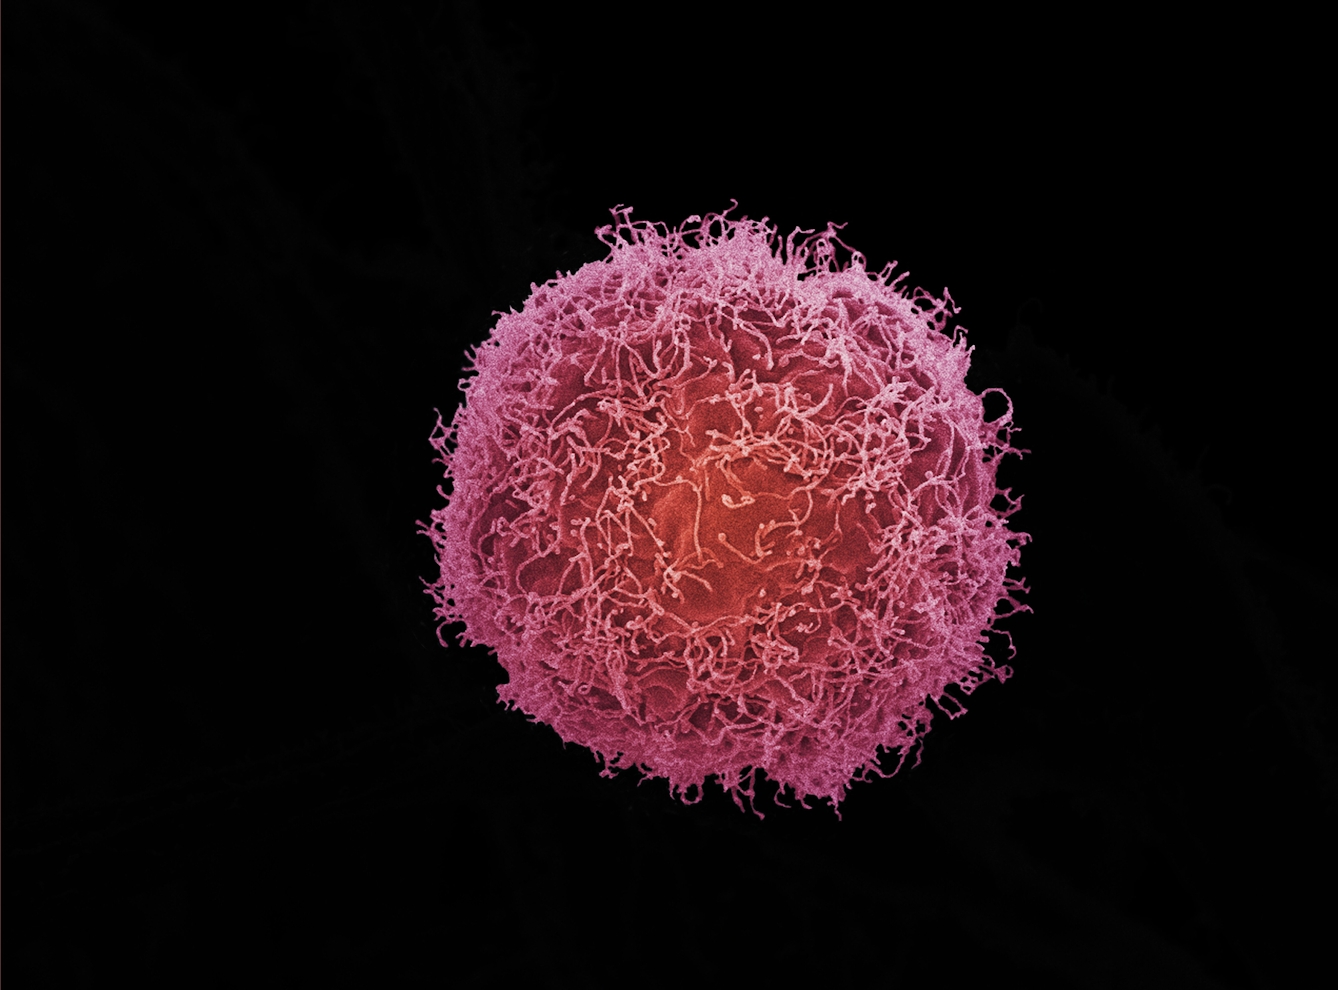 Colour photograph featuring an enlarged image of a skin cancer cell against a black background. The cell is spherical, pink and orange, and covered in string-like pink and orange strands.